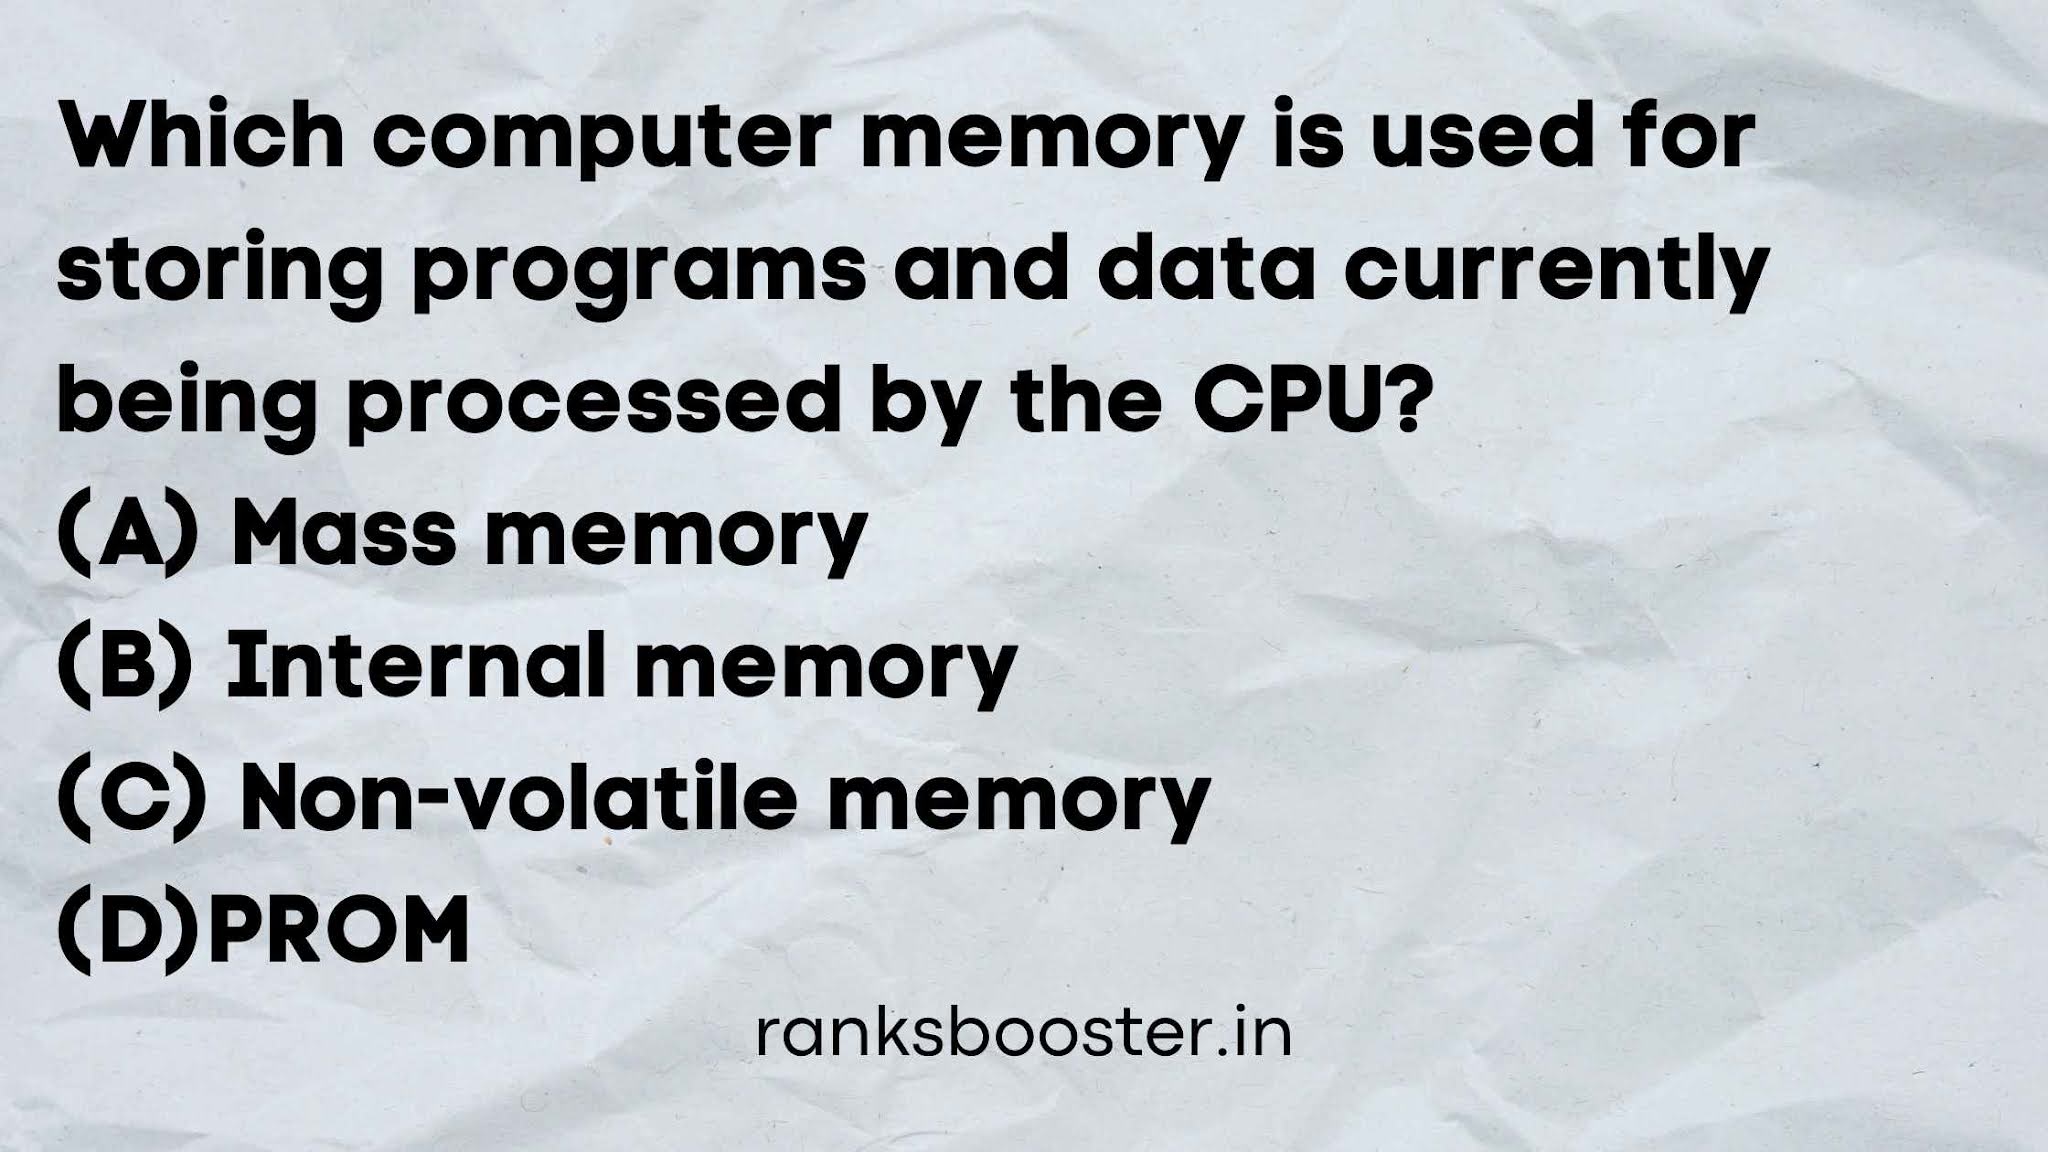 Which computer memory is used for storing programs and data currently being processed by the CPU? (A) Mass memory (B) Internal memory (C) Non-volatile memory (D)PROM